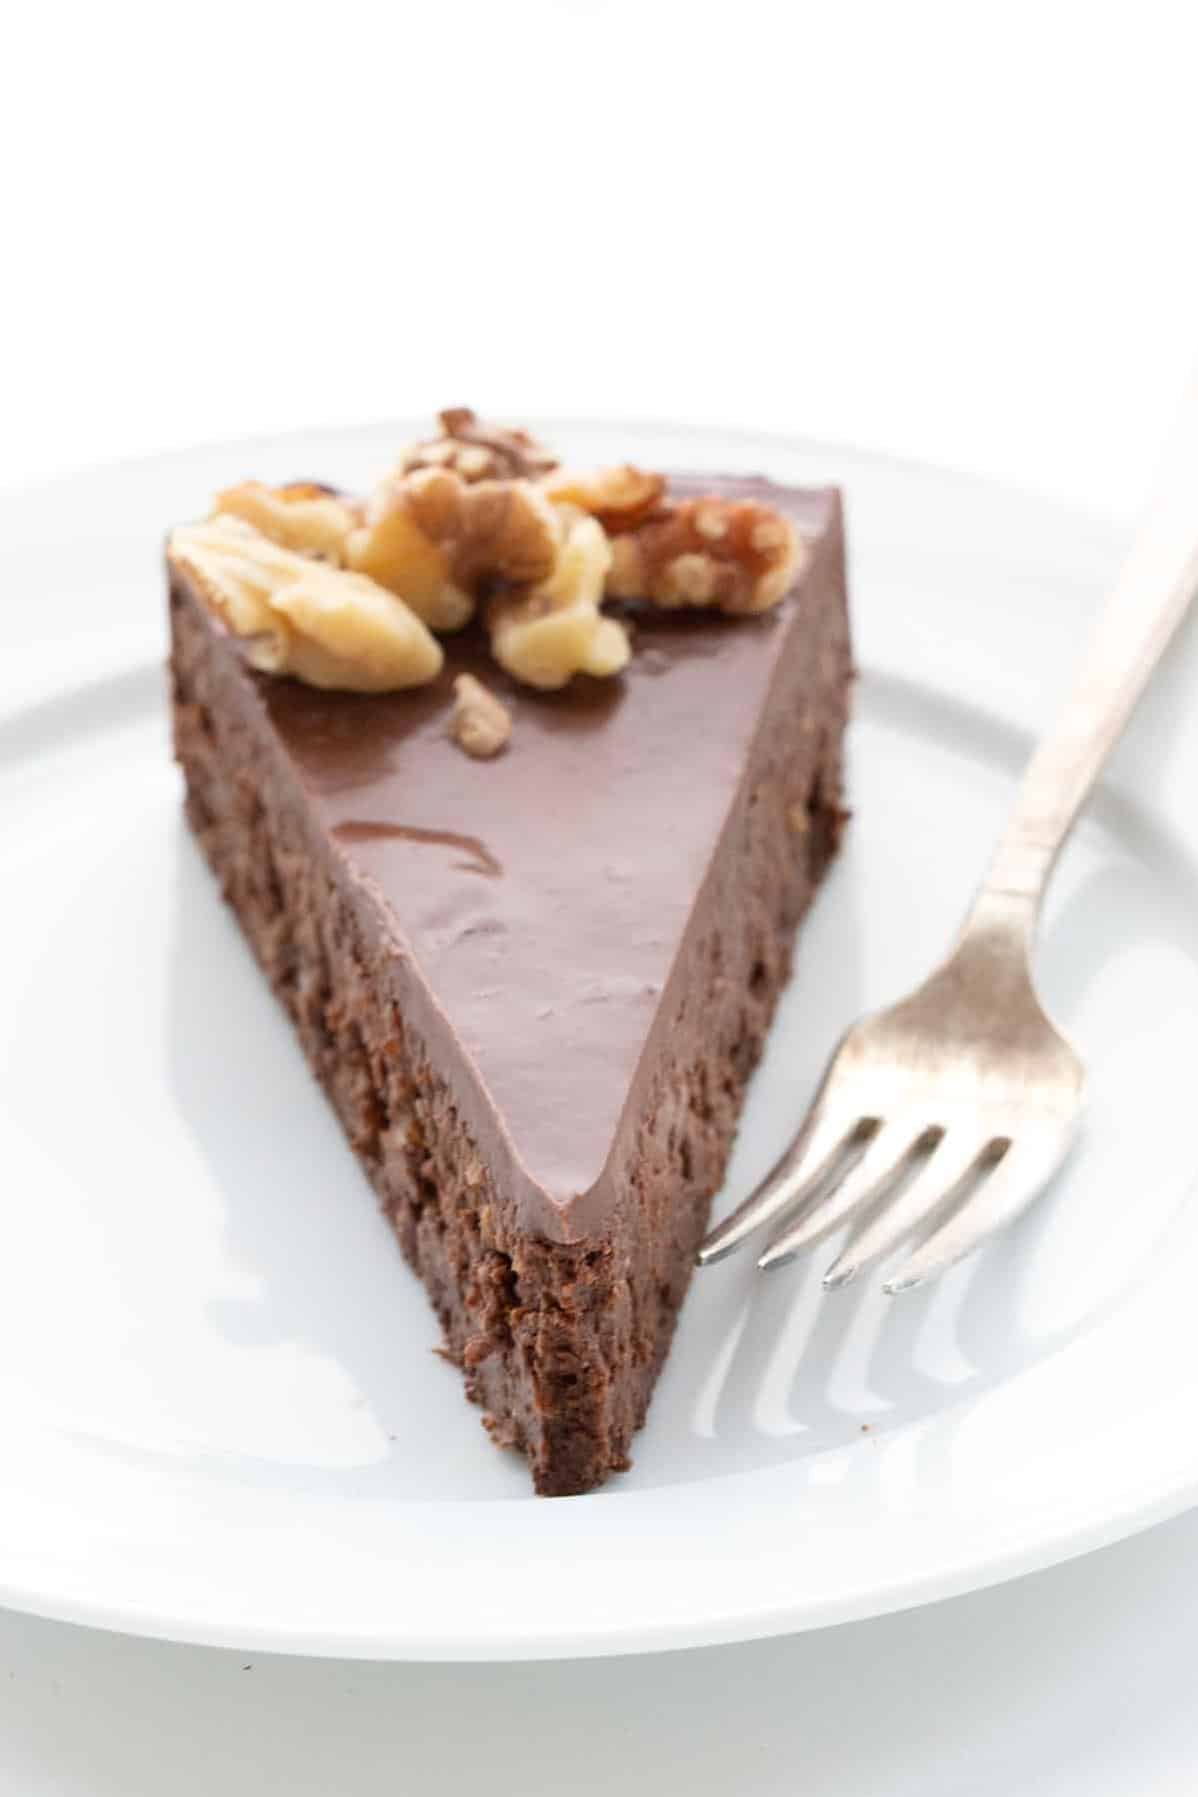  Walnuts and chocolate are the perfect duo for this mouth-watering dessert.